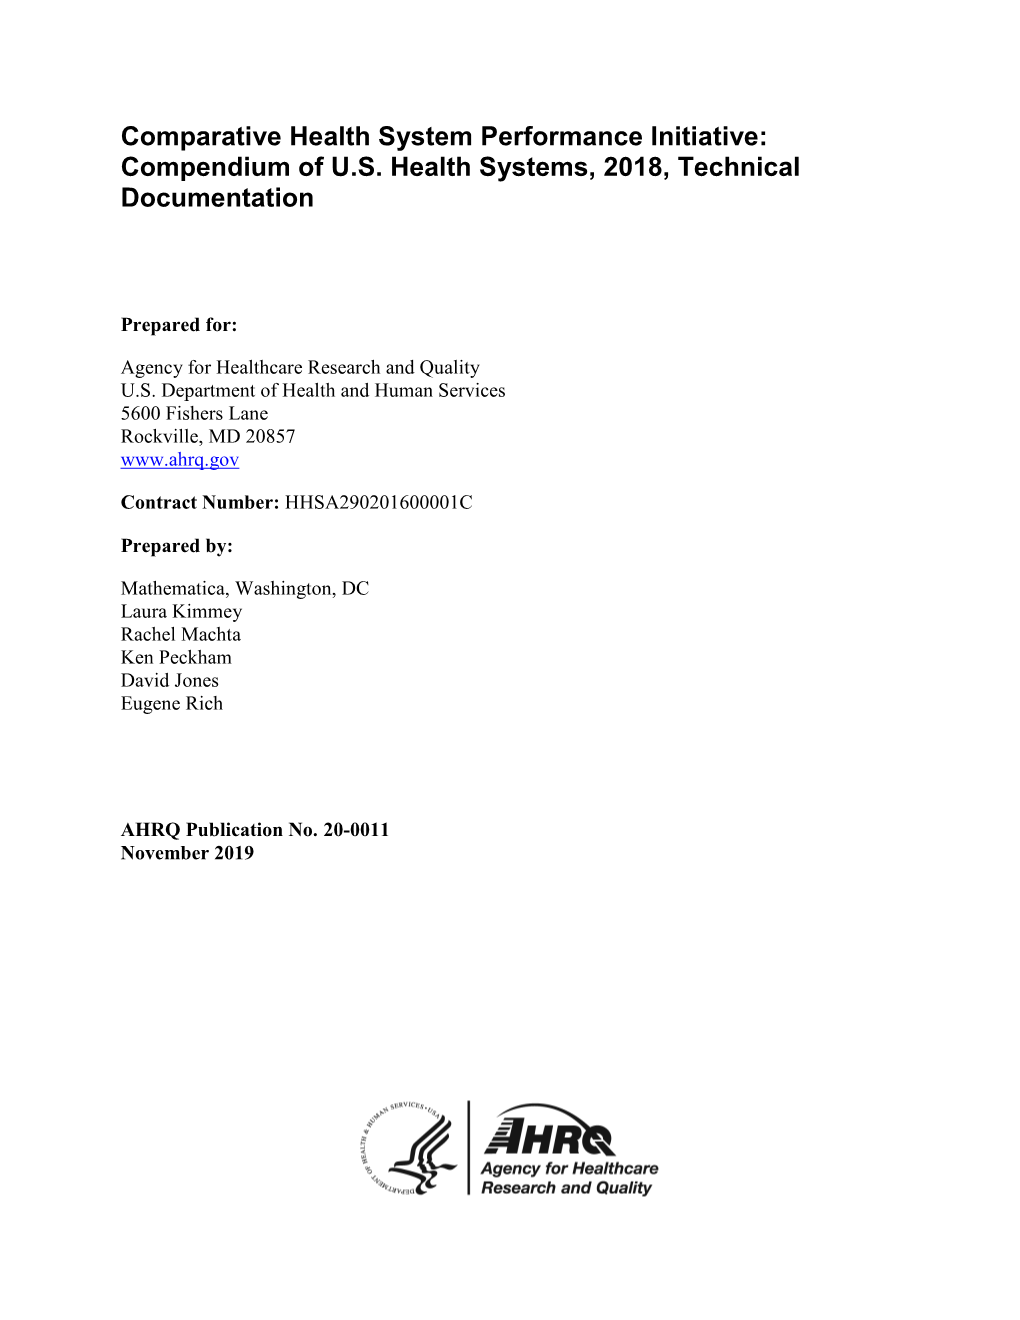 Comparative Health System Performance Initiative: Compendium of U.S. Health Systems, 2018, Technical Documentation